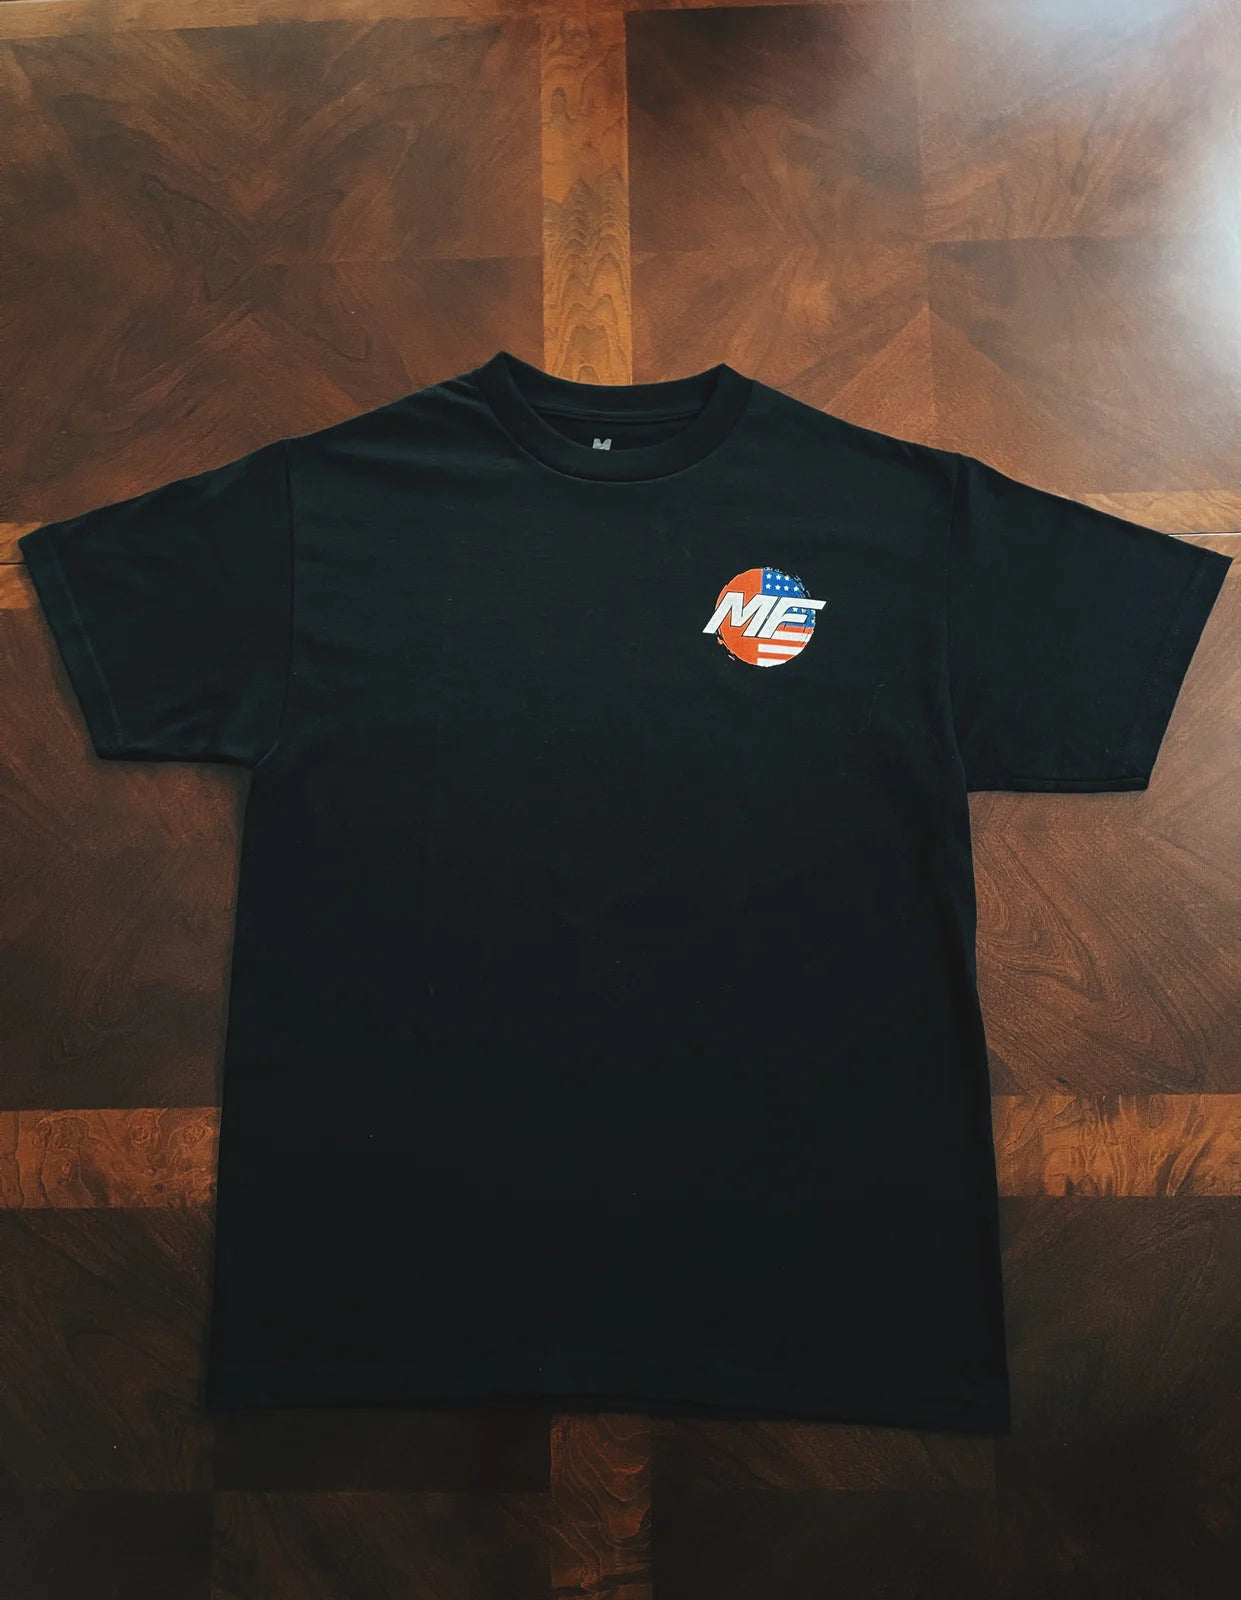 FRESHEST / NEVER GIVE UP TEE